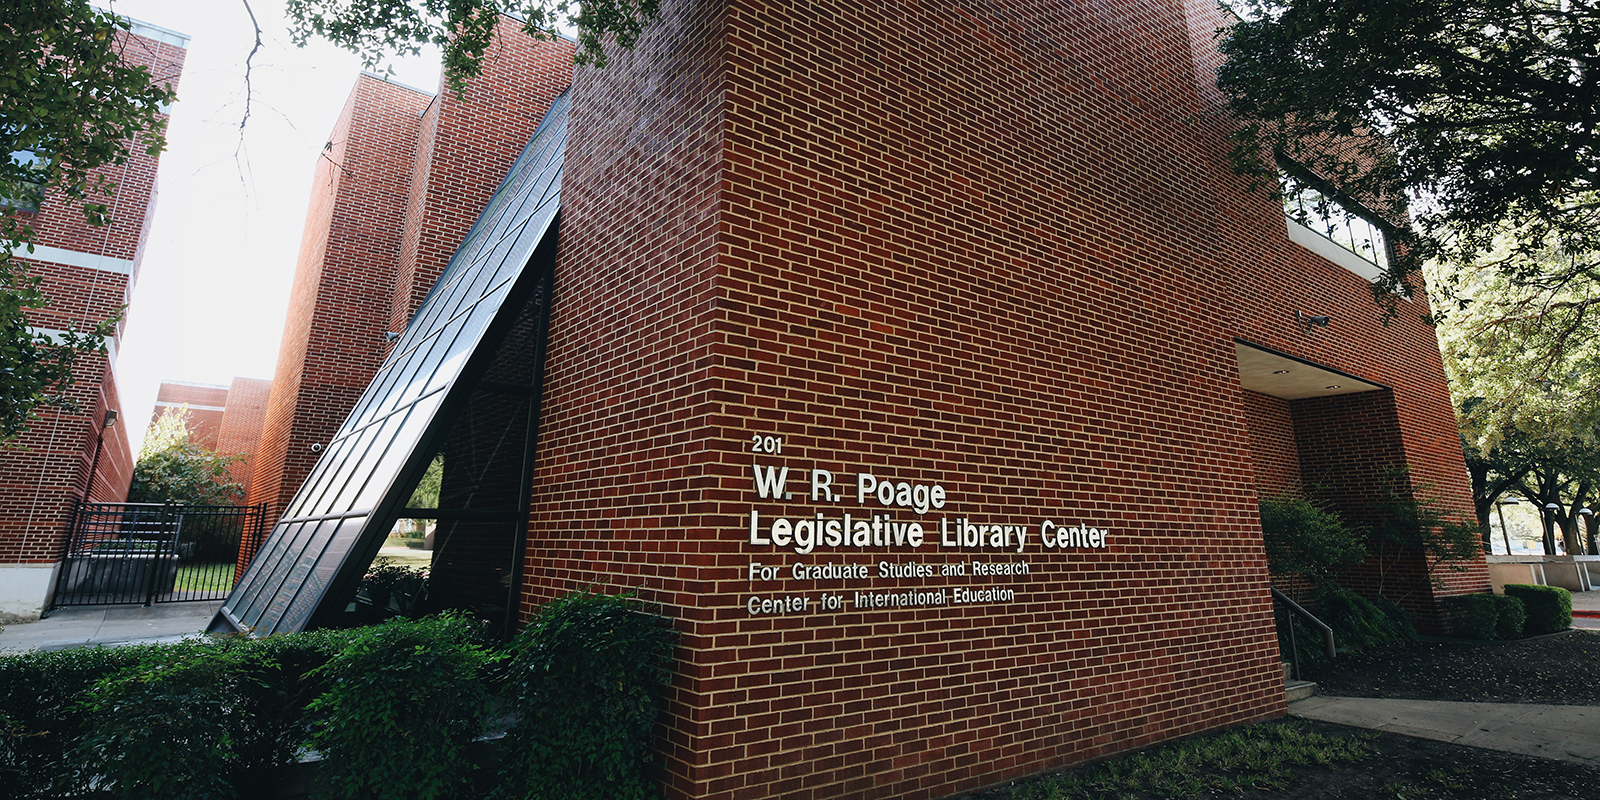 The exterior of Baylor's Poage Library